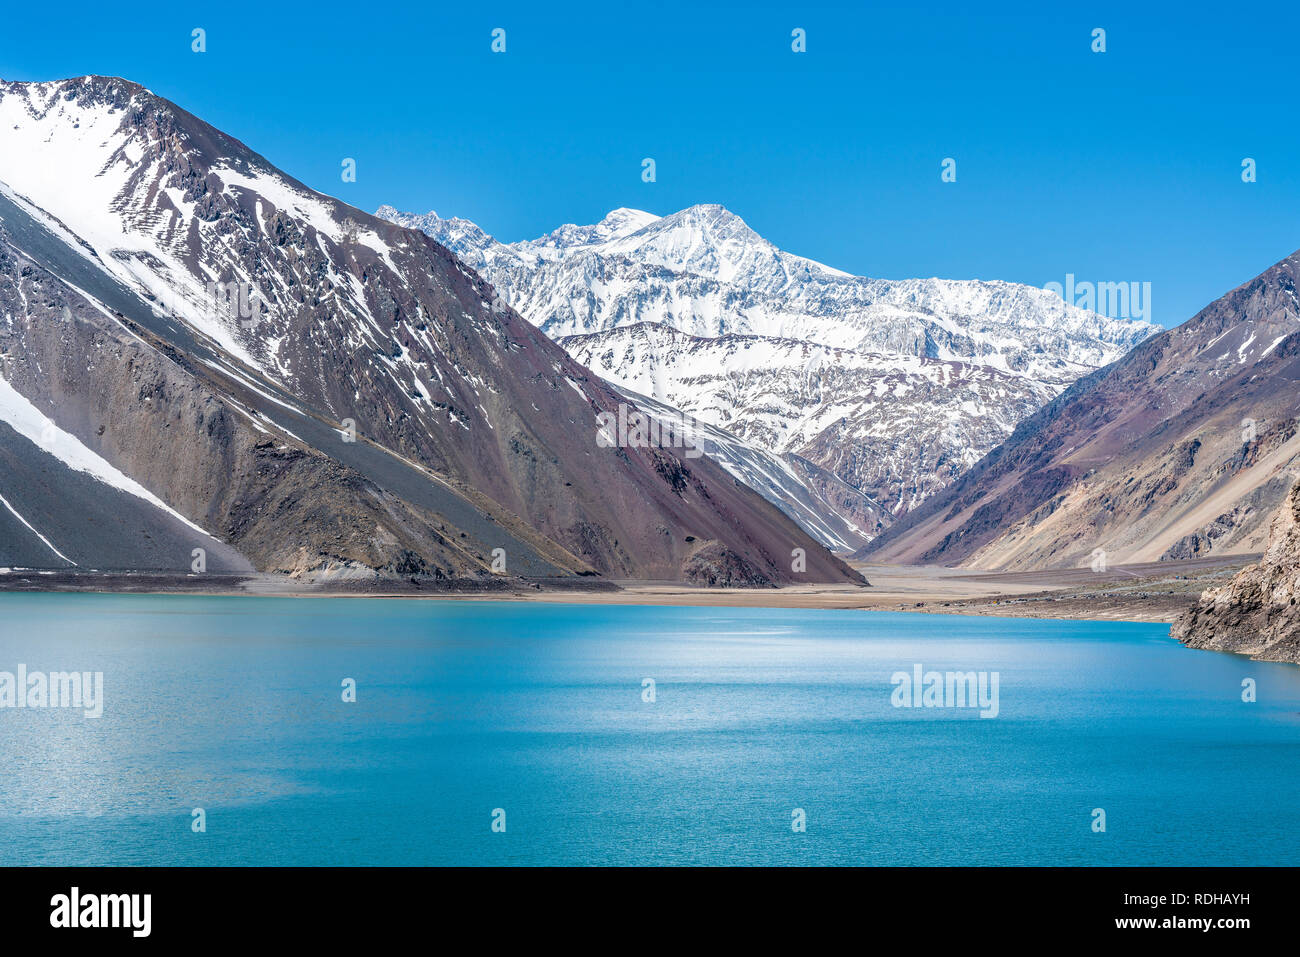 Embalse del Yeso (Yeso Dam) awe high altitude turquoise waters lake inside an amazing rugged landscape. Steep mountains on an awe scenery Stock Photo